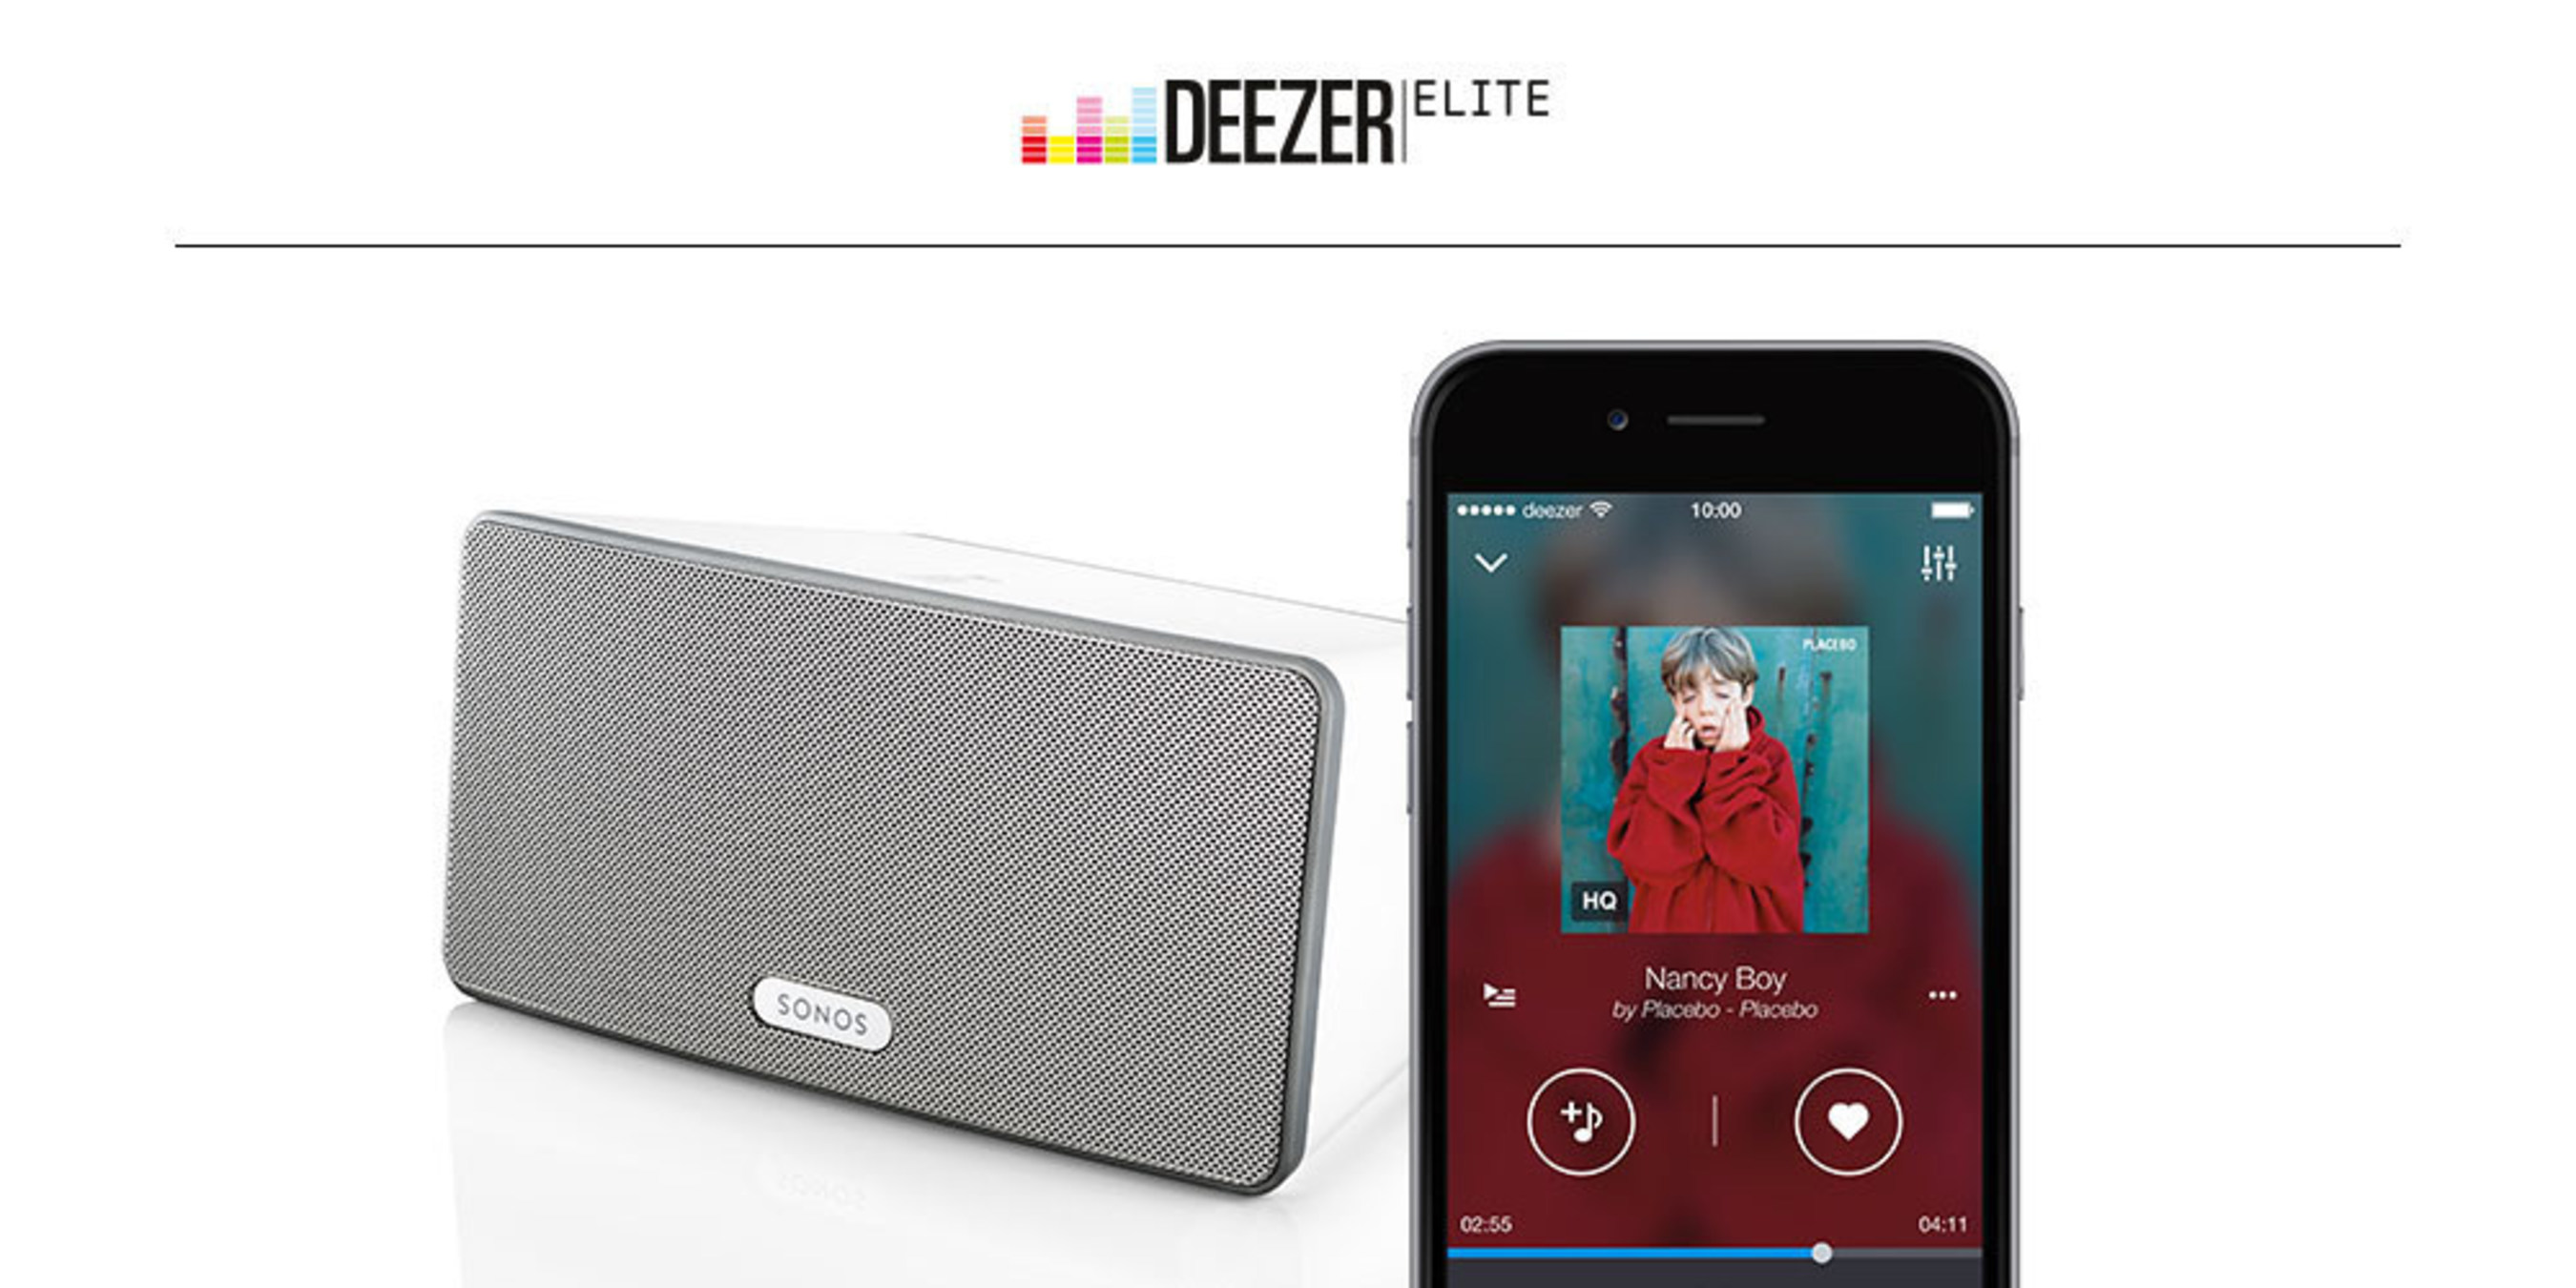 Deezer Announces High Definition Streaming on Sonos Globally, Deezer Elite Becomes Largest Global High Definition Streaming service